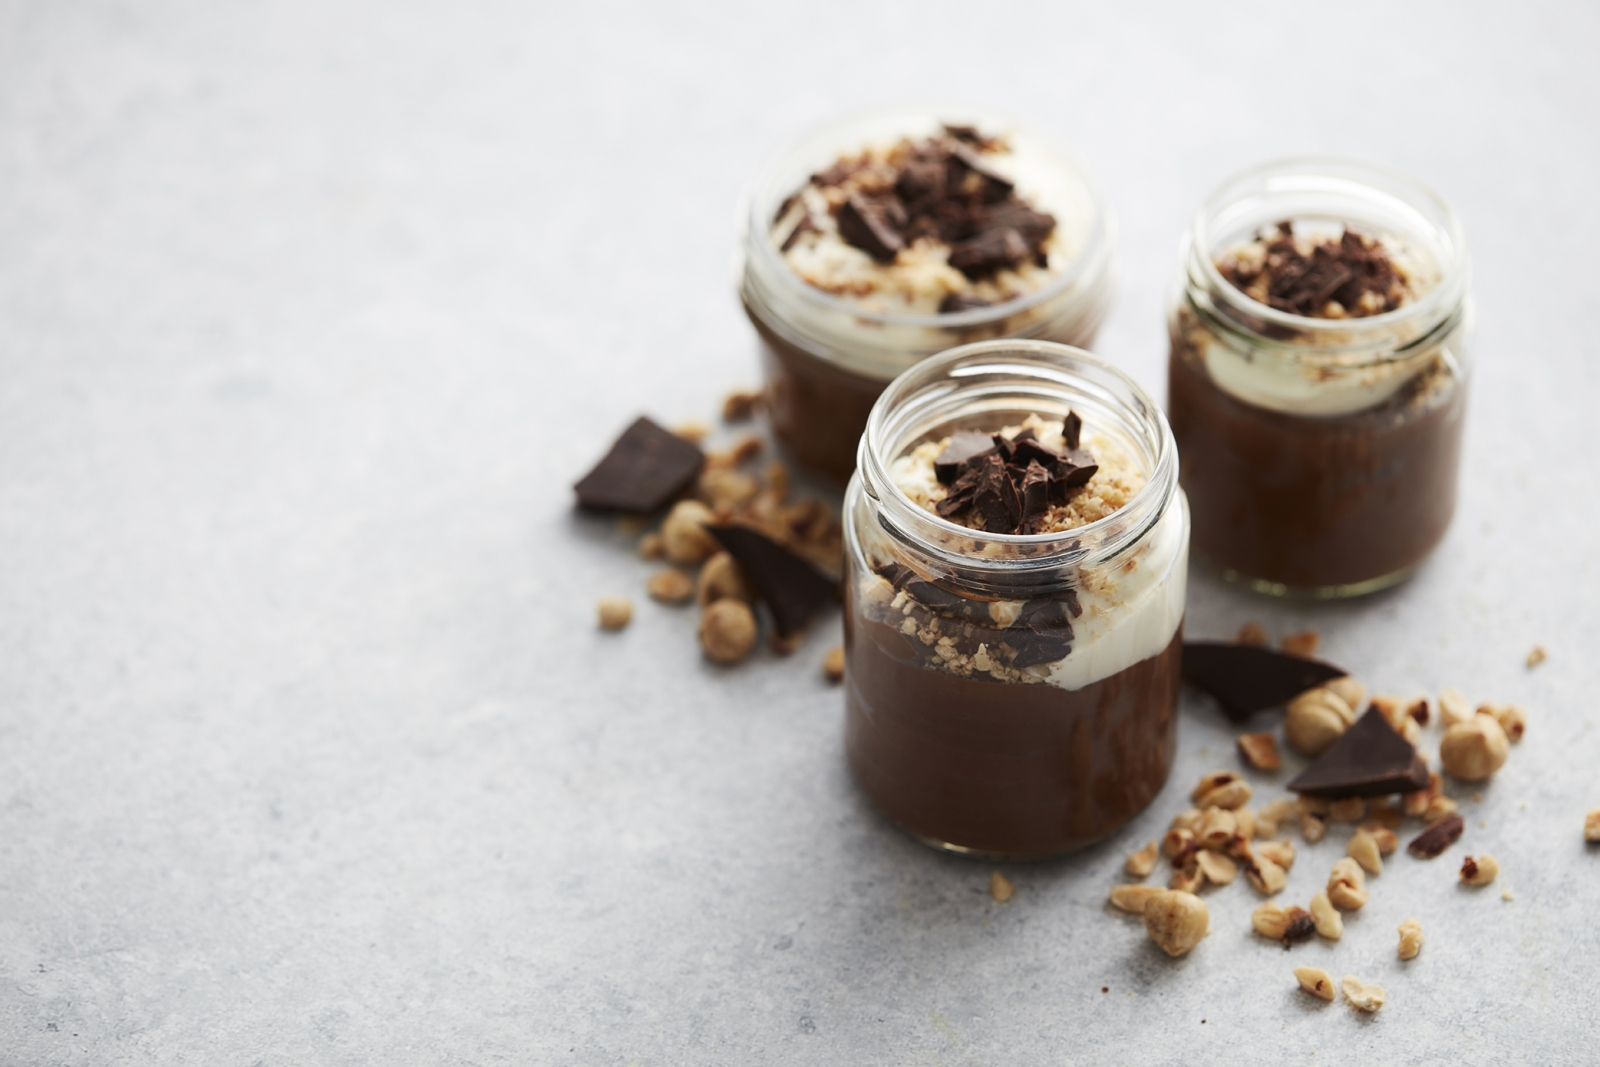 Sugar Free Vegan Chocolate Pudding from my new low carb cookbook 'Keto in 15 Minuten'. Dairy Free, Paleo, Whole 30.